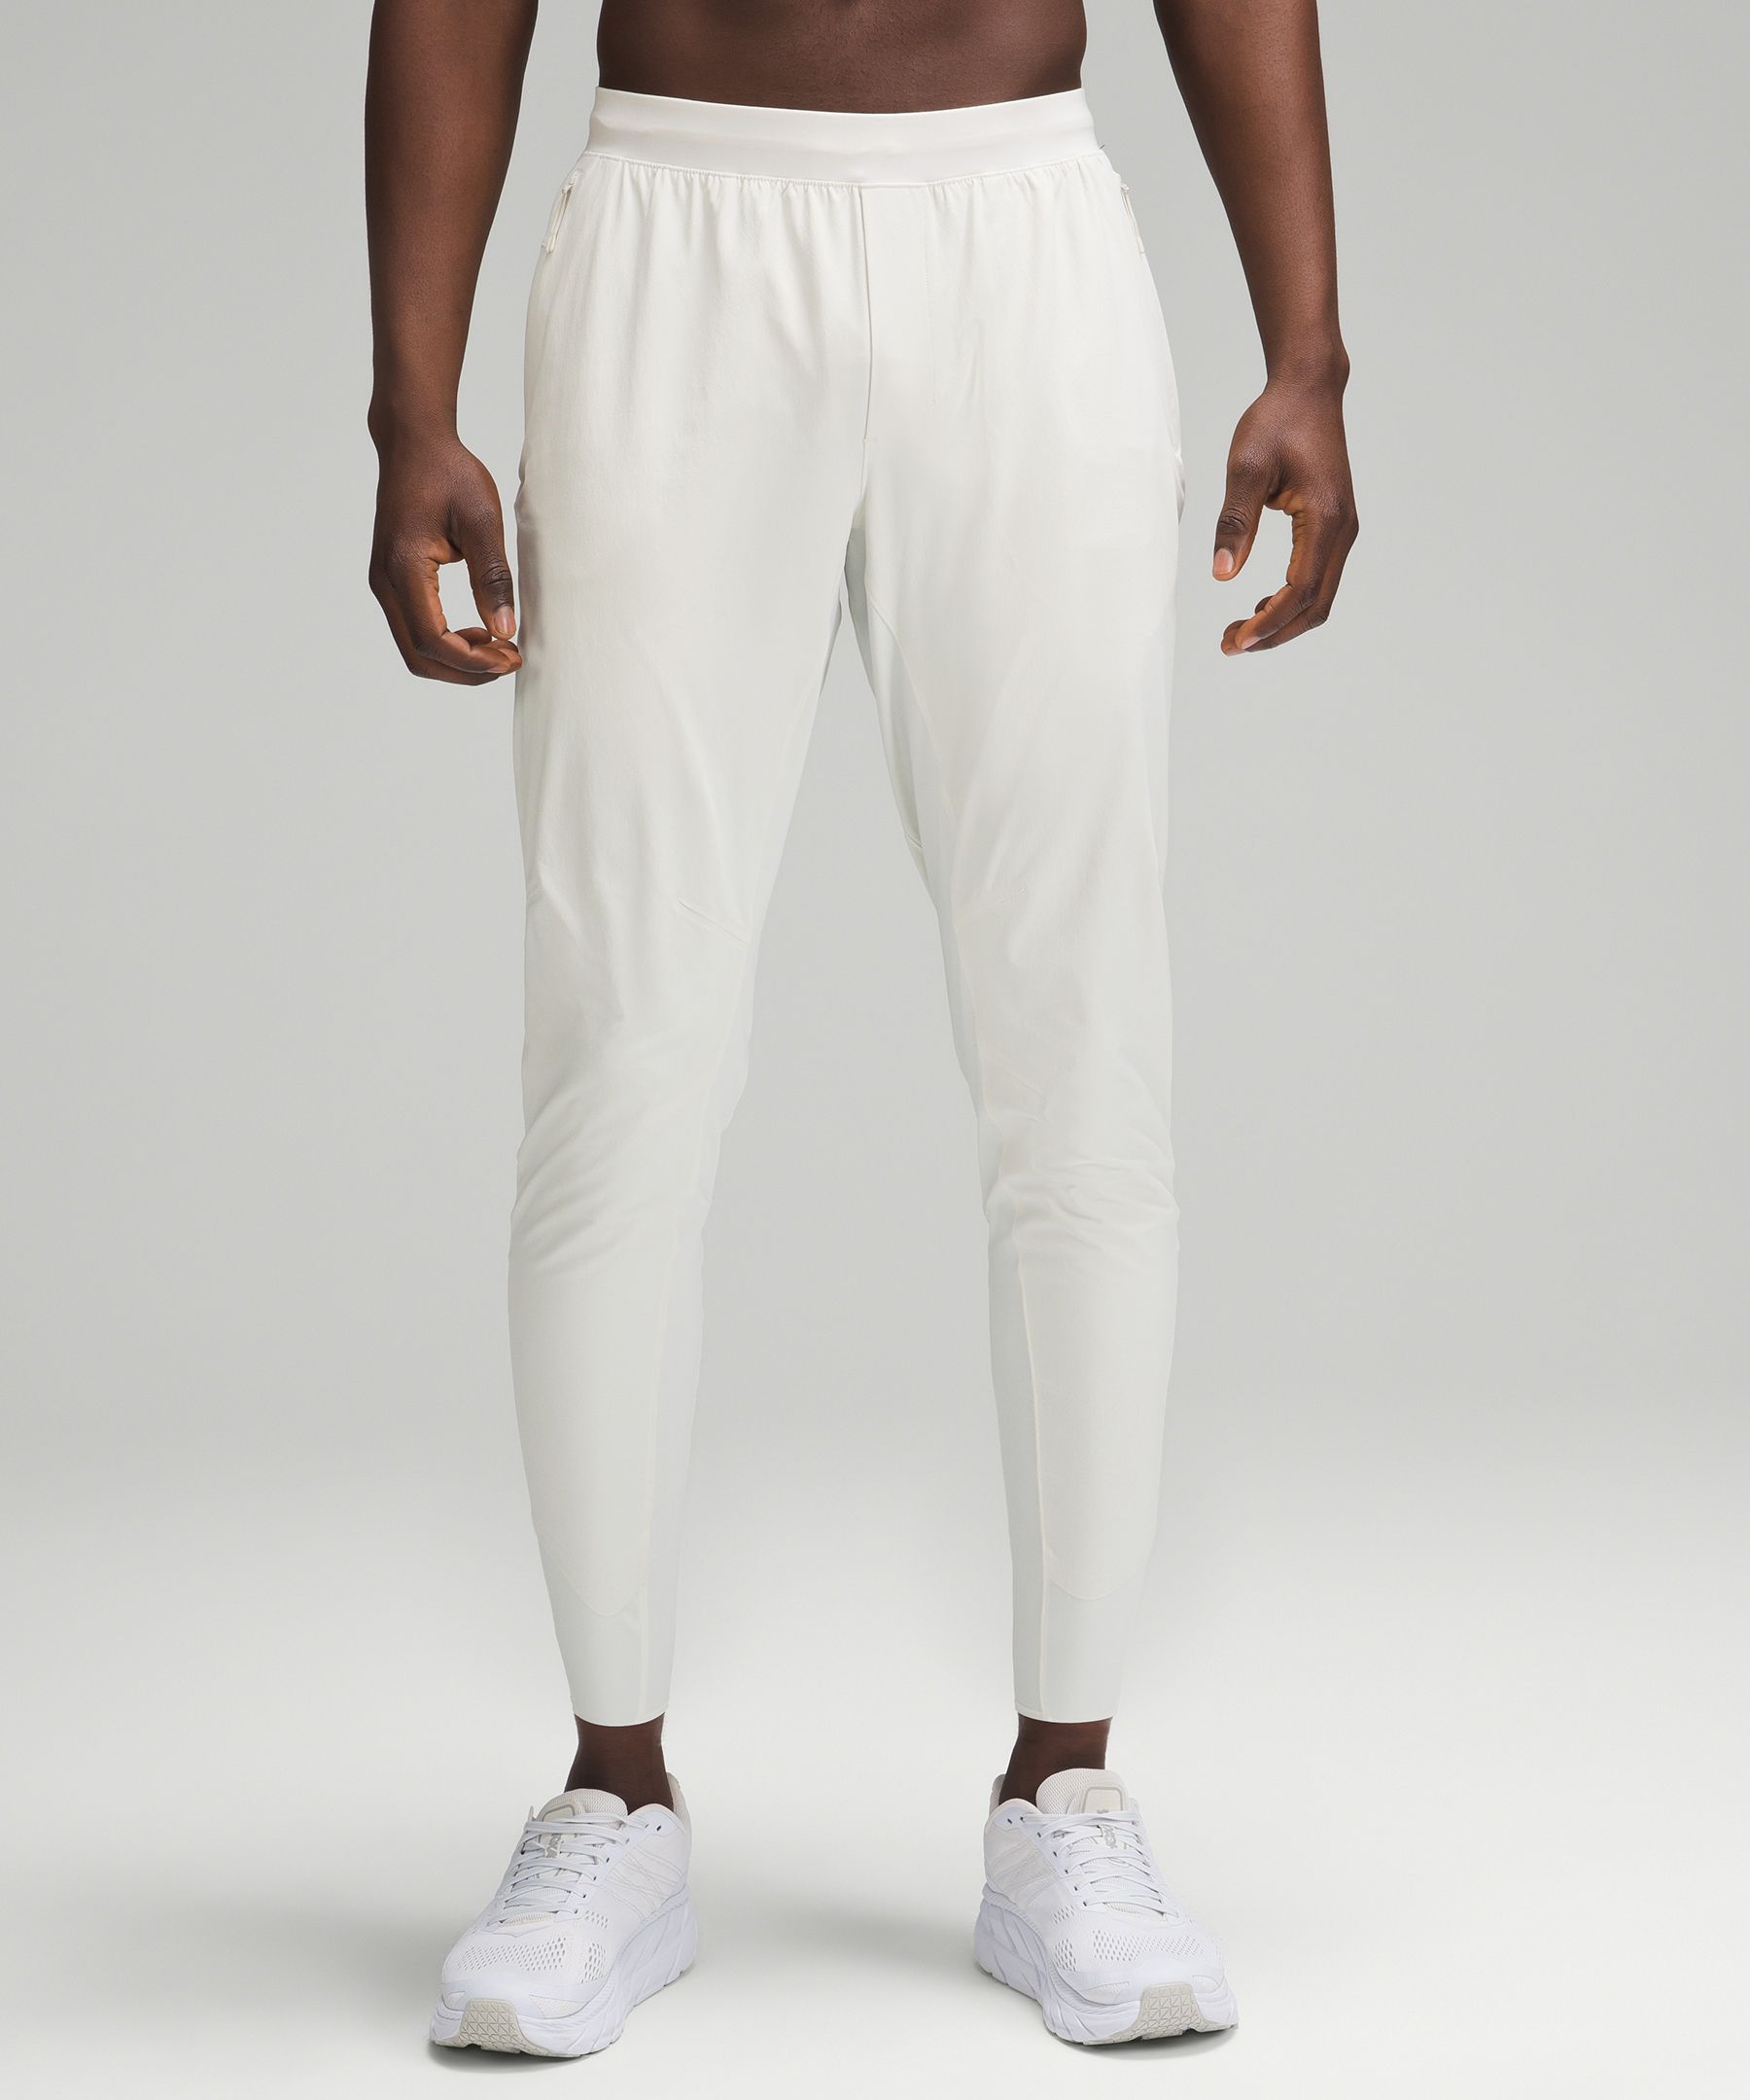 Lululemon Surge Joggers In Rover